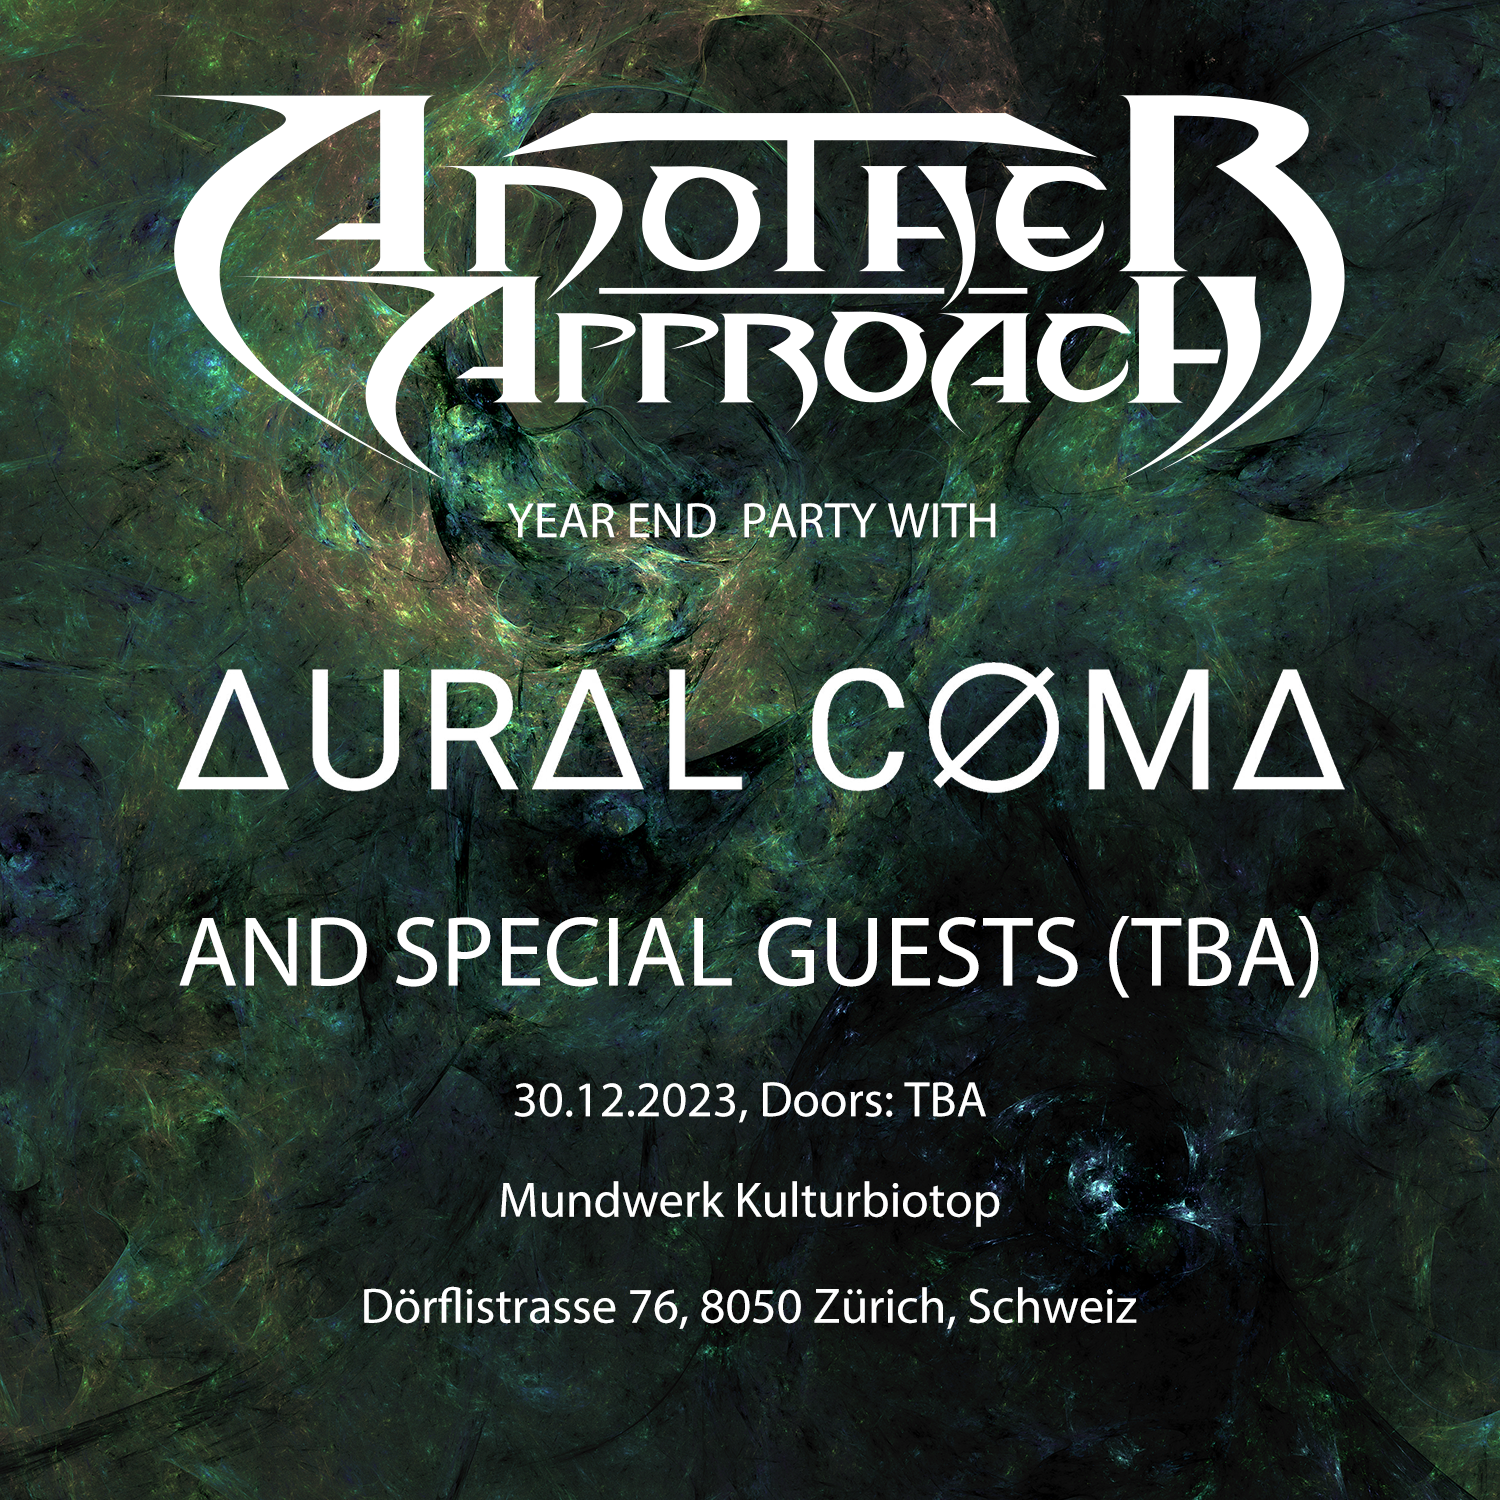 Another Approach &#38; Aural Coma